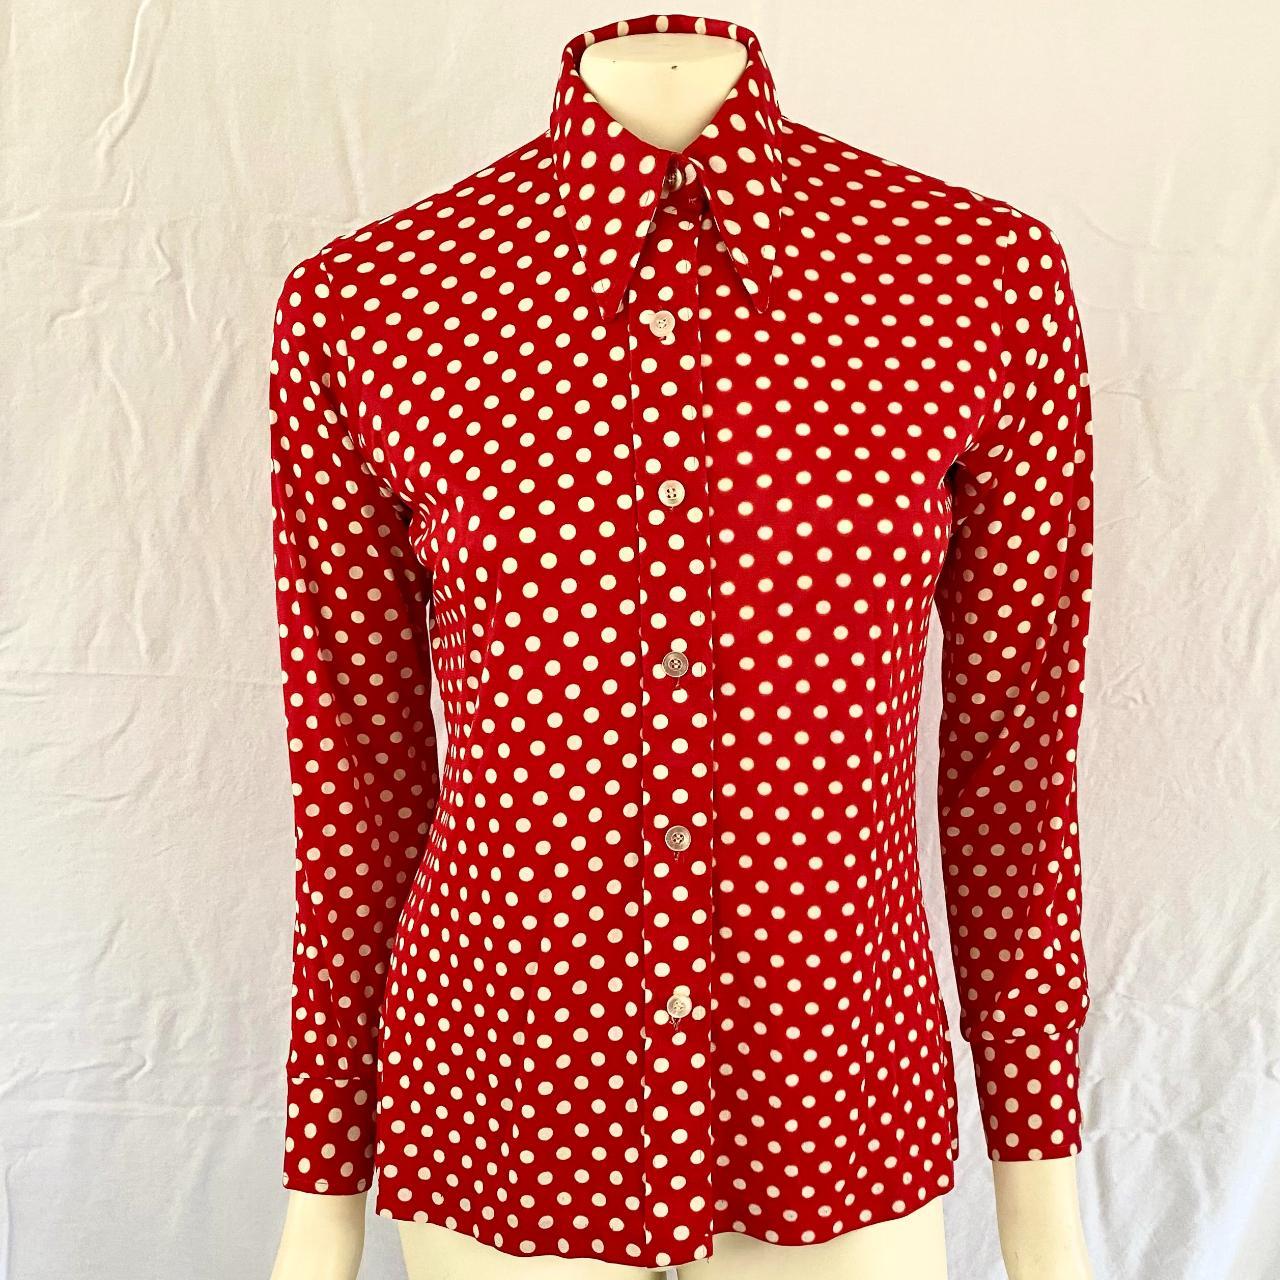 Vintage 1980s Shapely Red and White Polka Dot... - Depop